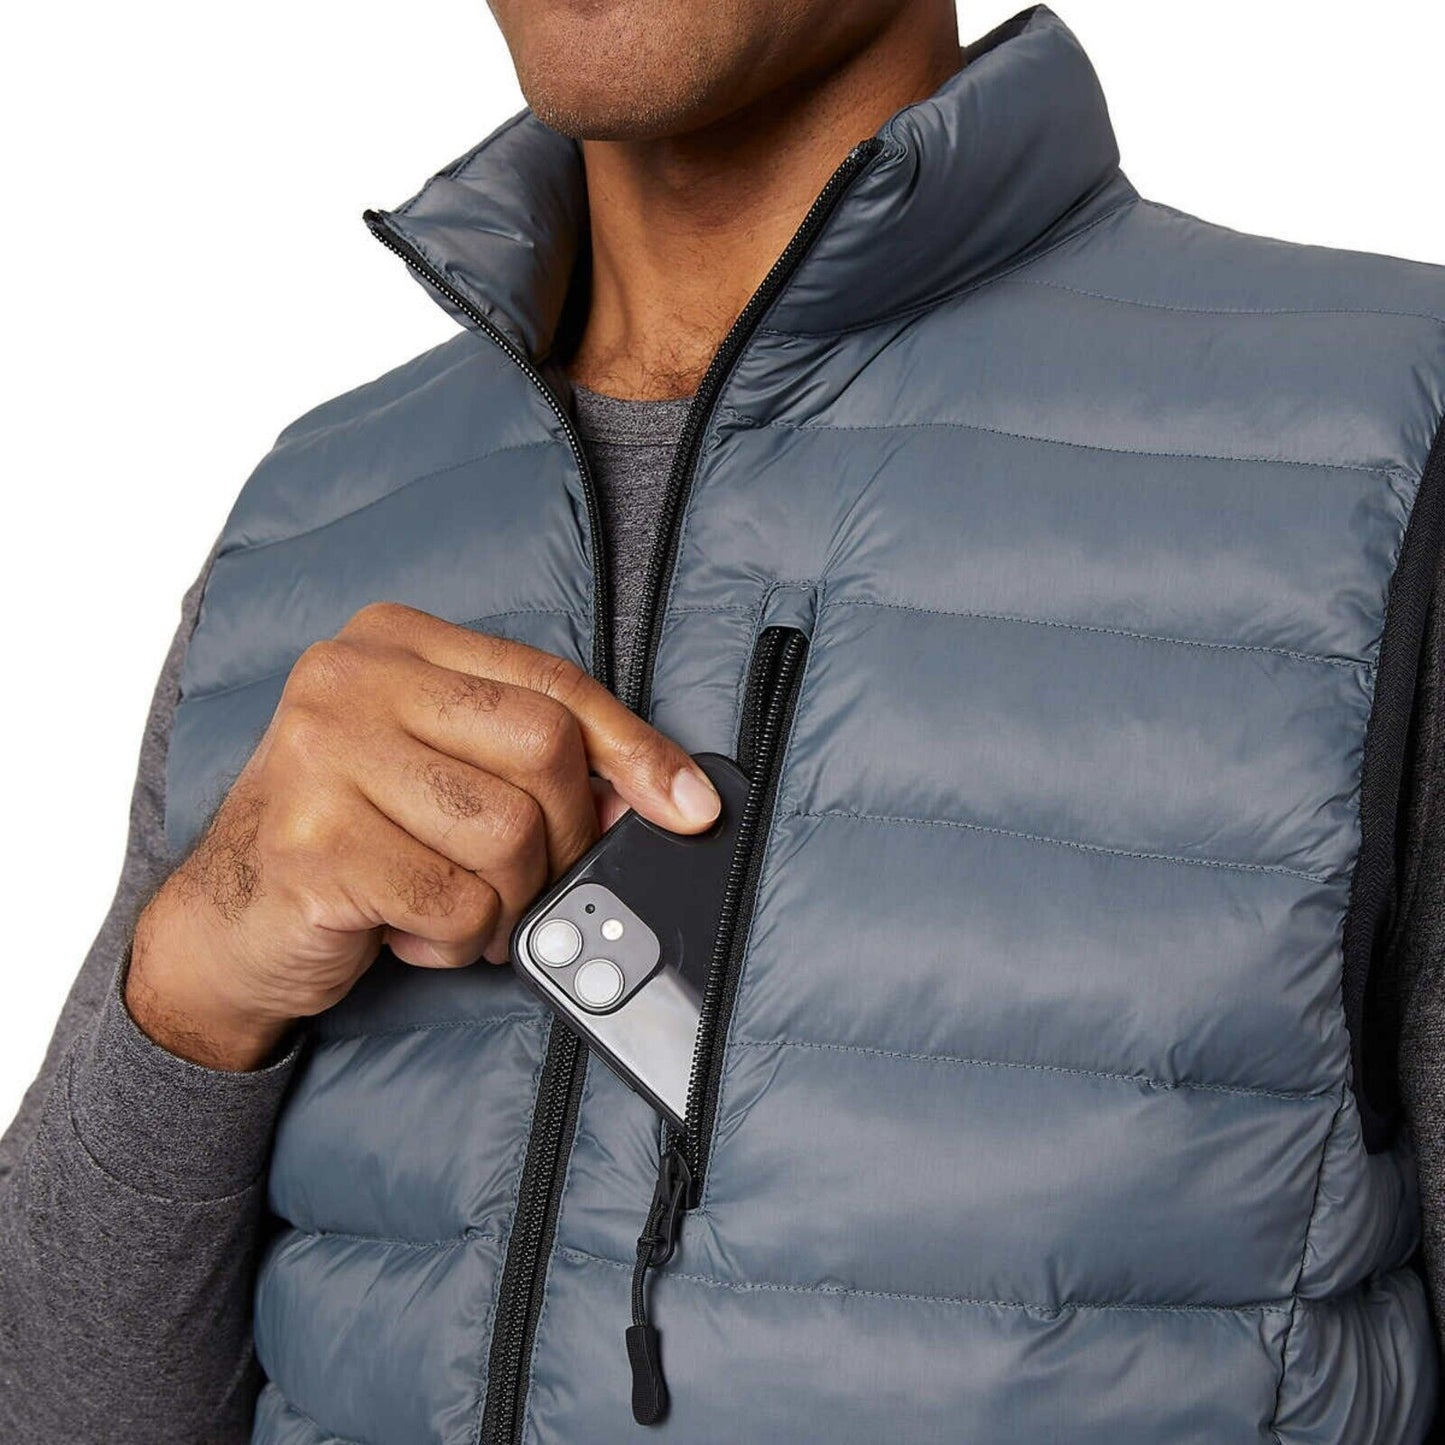 32 Degrees Quilted Stand-up Collar Lightweight Warmth Full Zip Vest